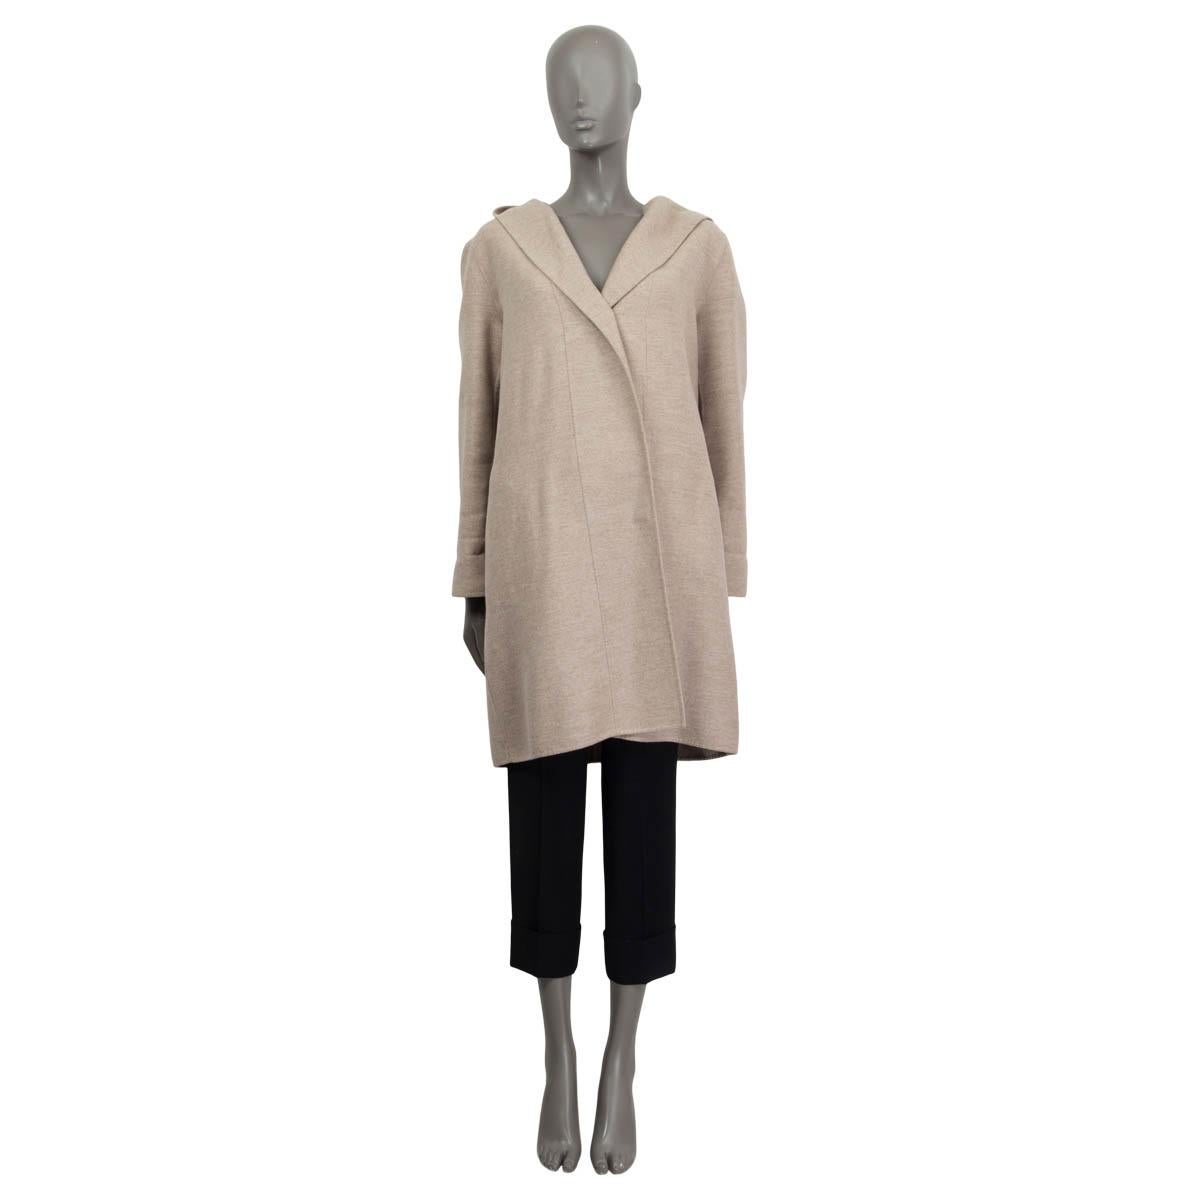 100% authentic Jil Sander long sleeve between-seasons coat in sand fleece wool (90%) and angora (10%). Features a hood and two slit pockets on the front. Opens with one brown button on the front. Pockets lined in beige silk (100%). Has been worn and